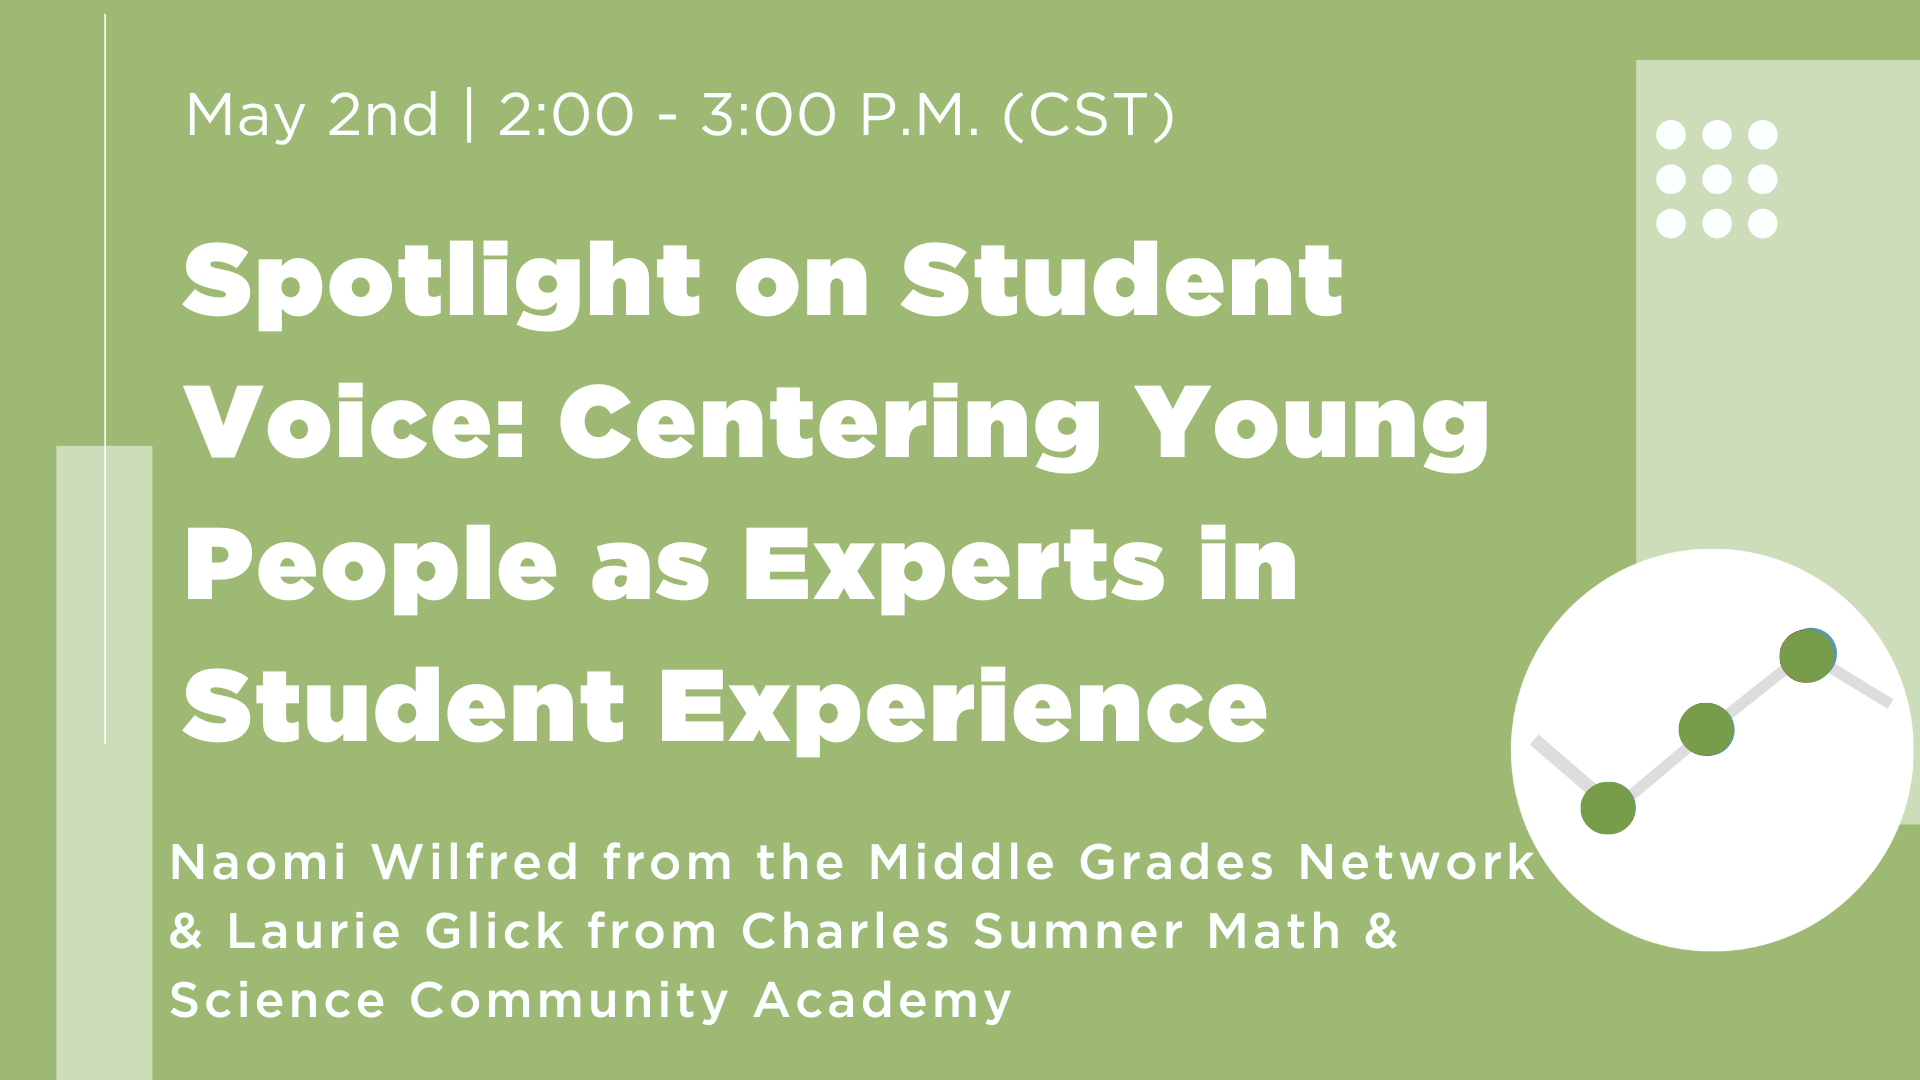 Spotlight on Student Voice: Young People as Experts in Student Experience